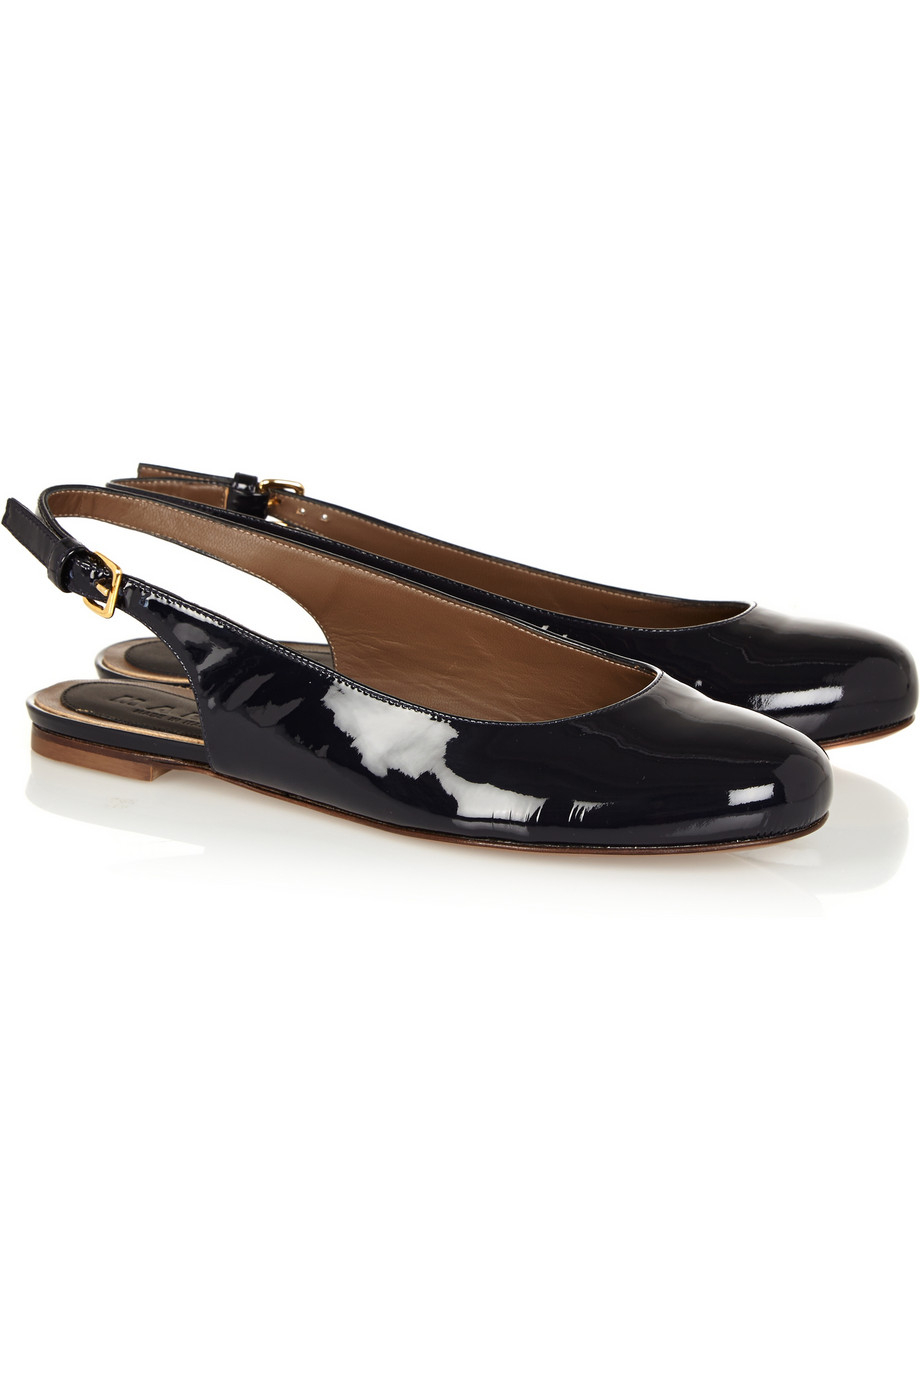 Marni Patent-Leather Slingback Ballet Flats in Navy (Blue) - Lyst